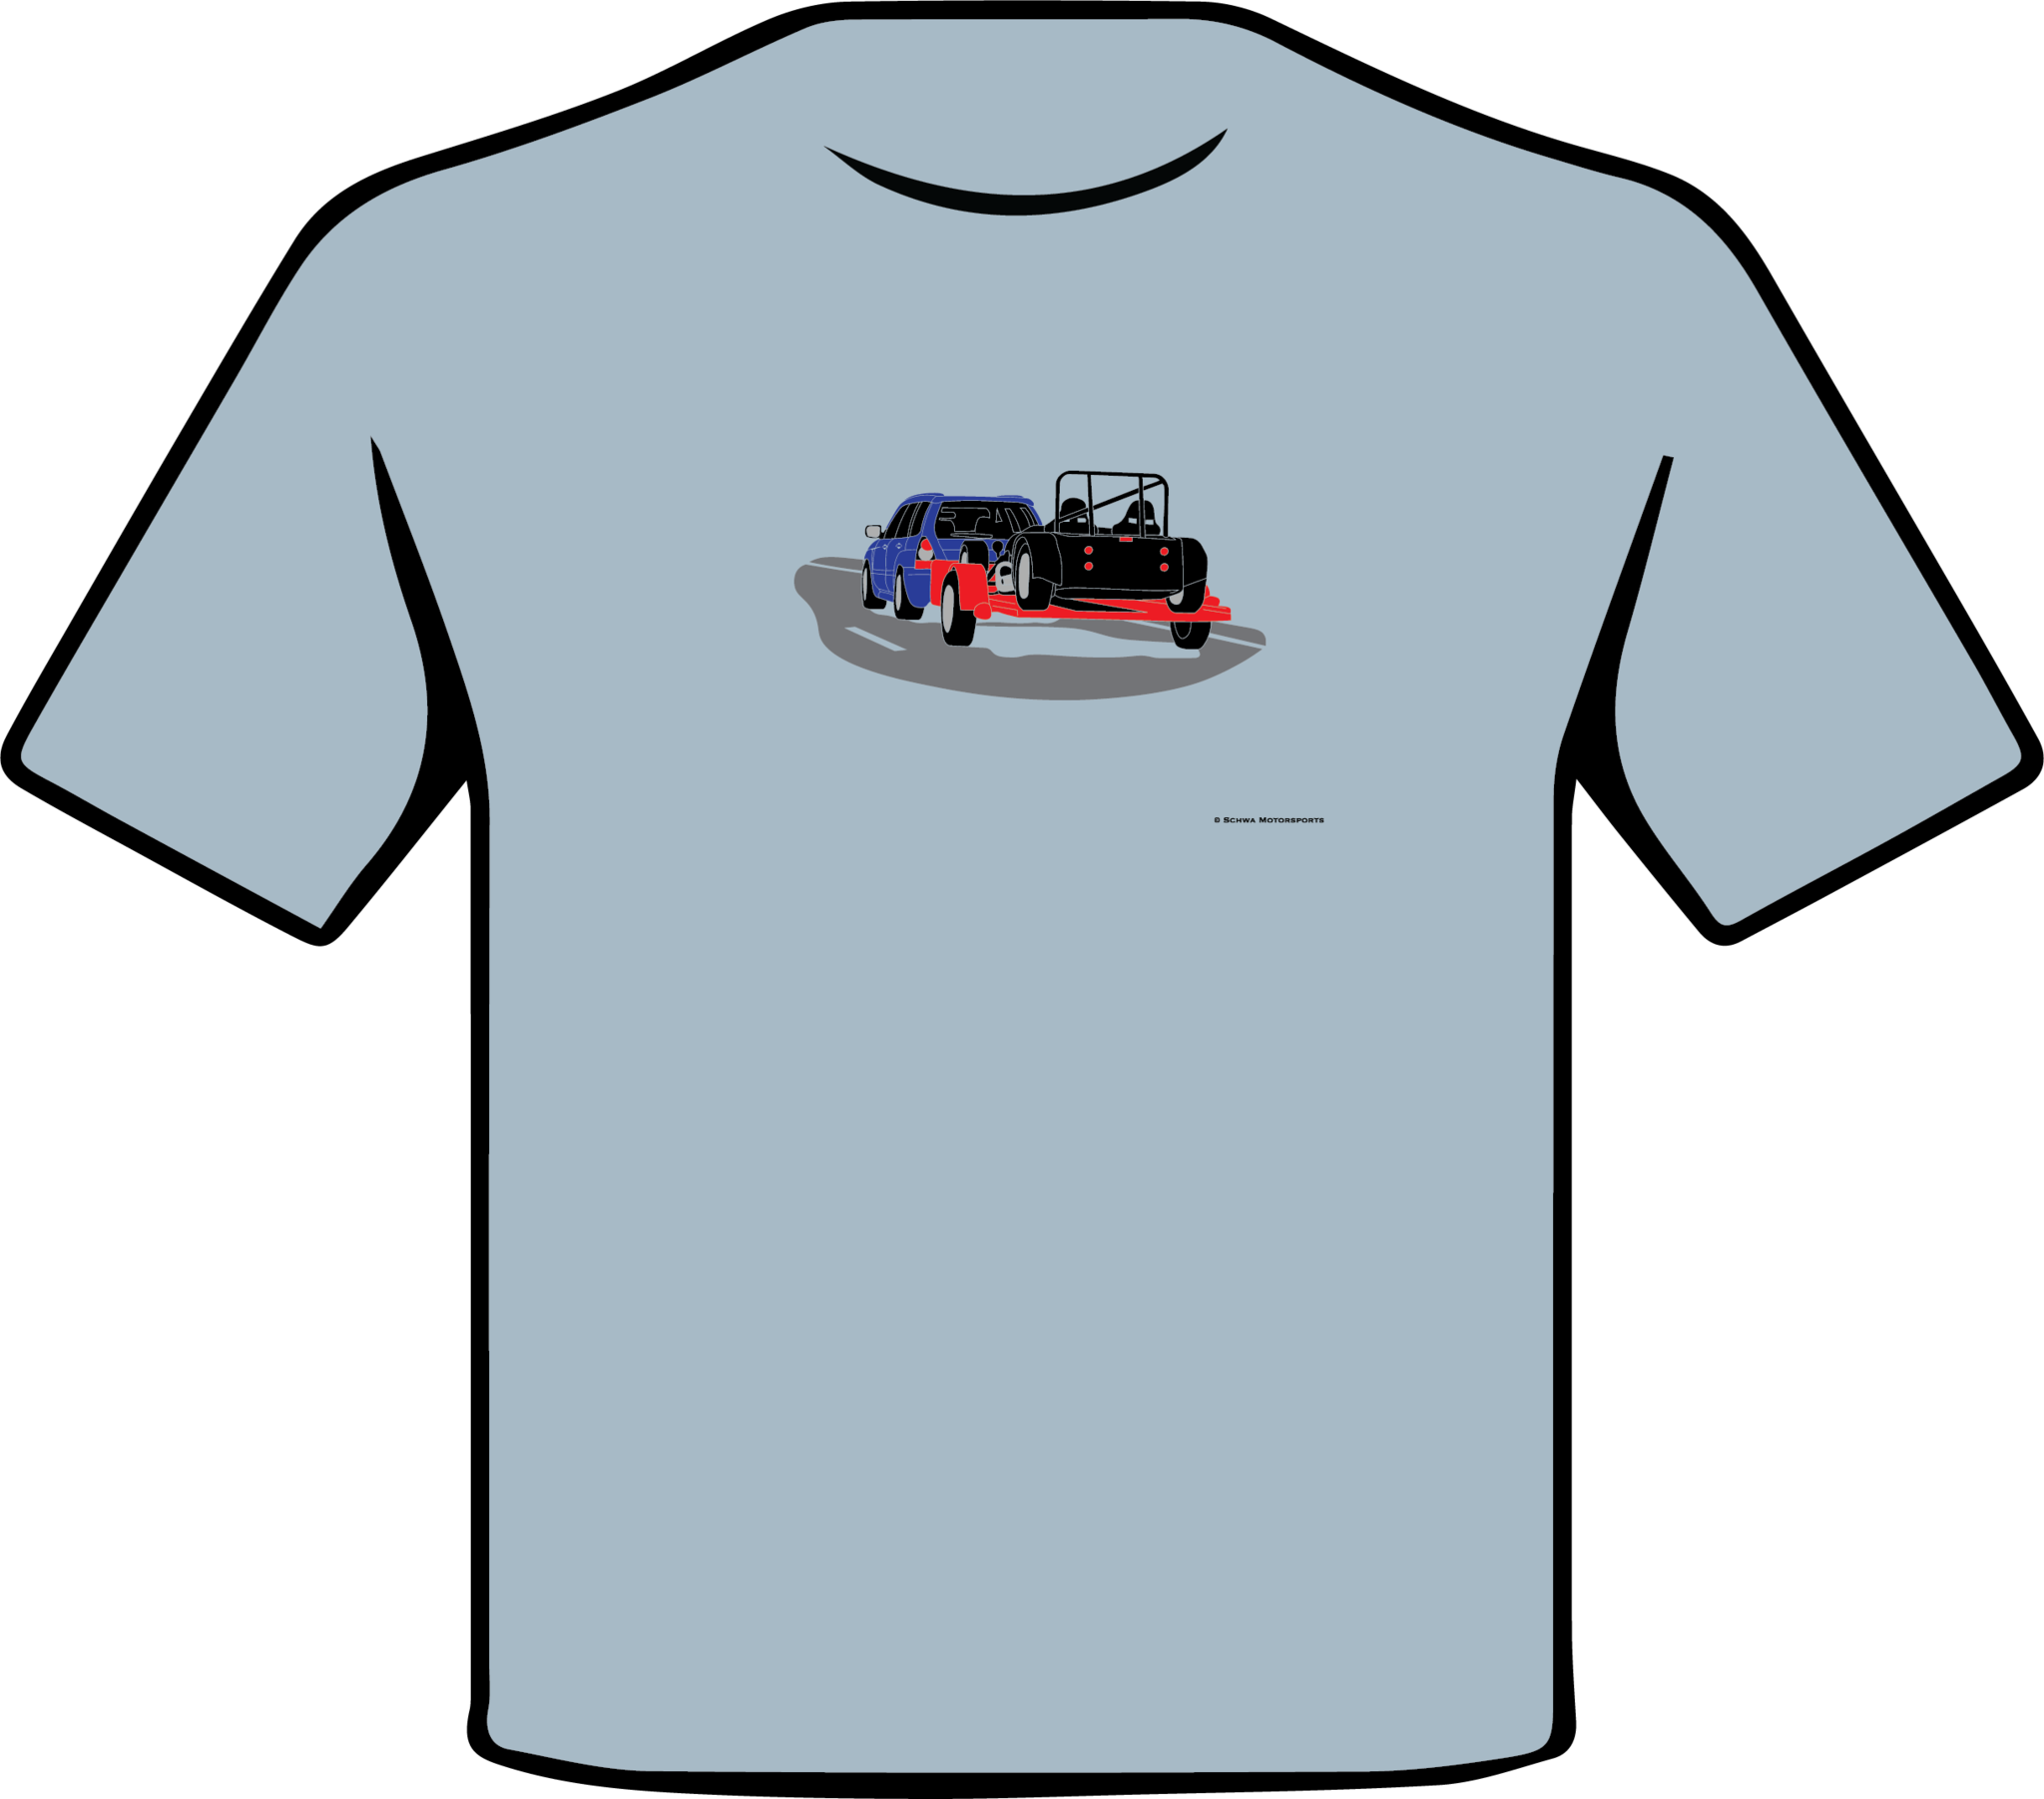 Subaru Forester Towing Lotus 7 Rear 3/4 Angle Multi Color T-Shirt